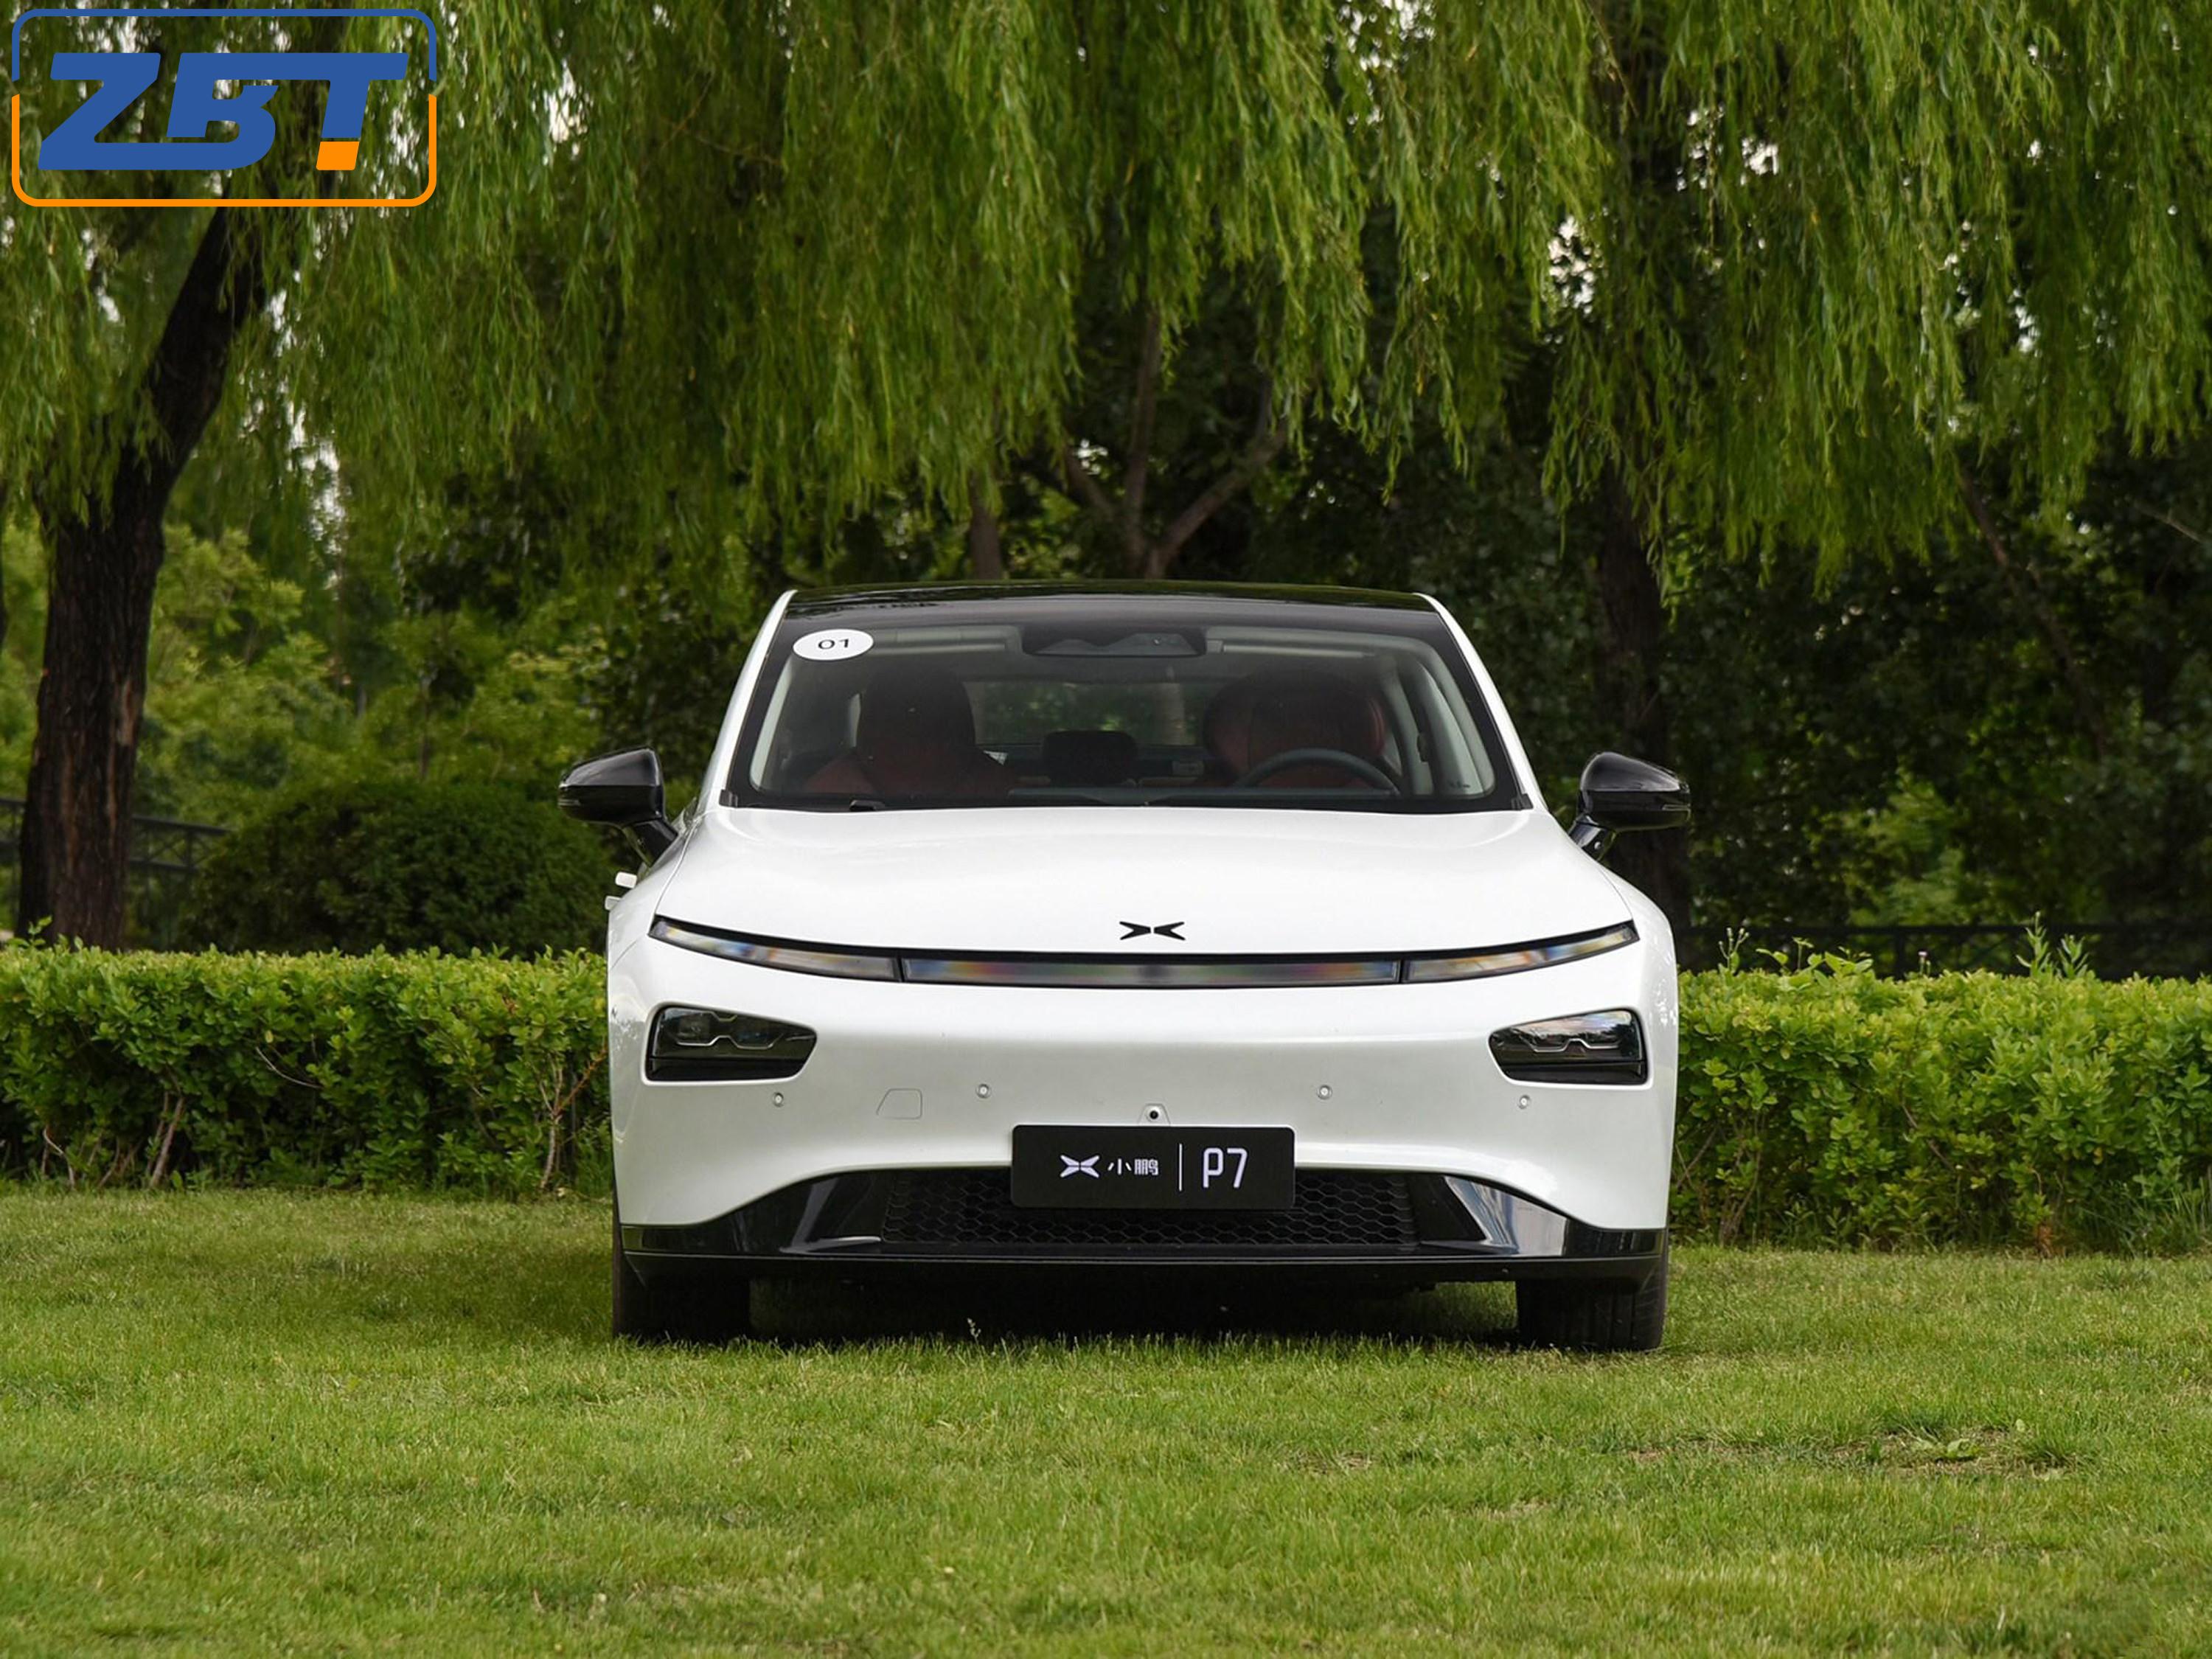 LHD Xpeng P7 Super Sport Ev Coupe Fastback Electric Intelligent Sedan 4x2 4x4 Autos Car with Panoramic Skylight